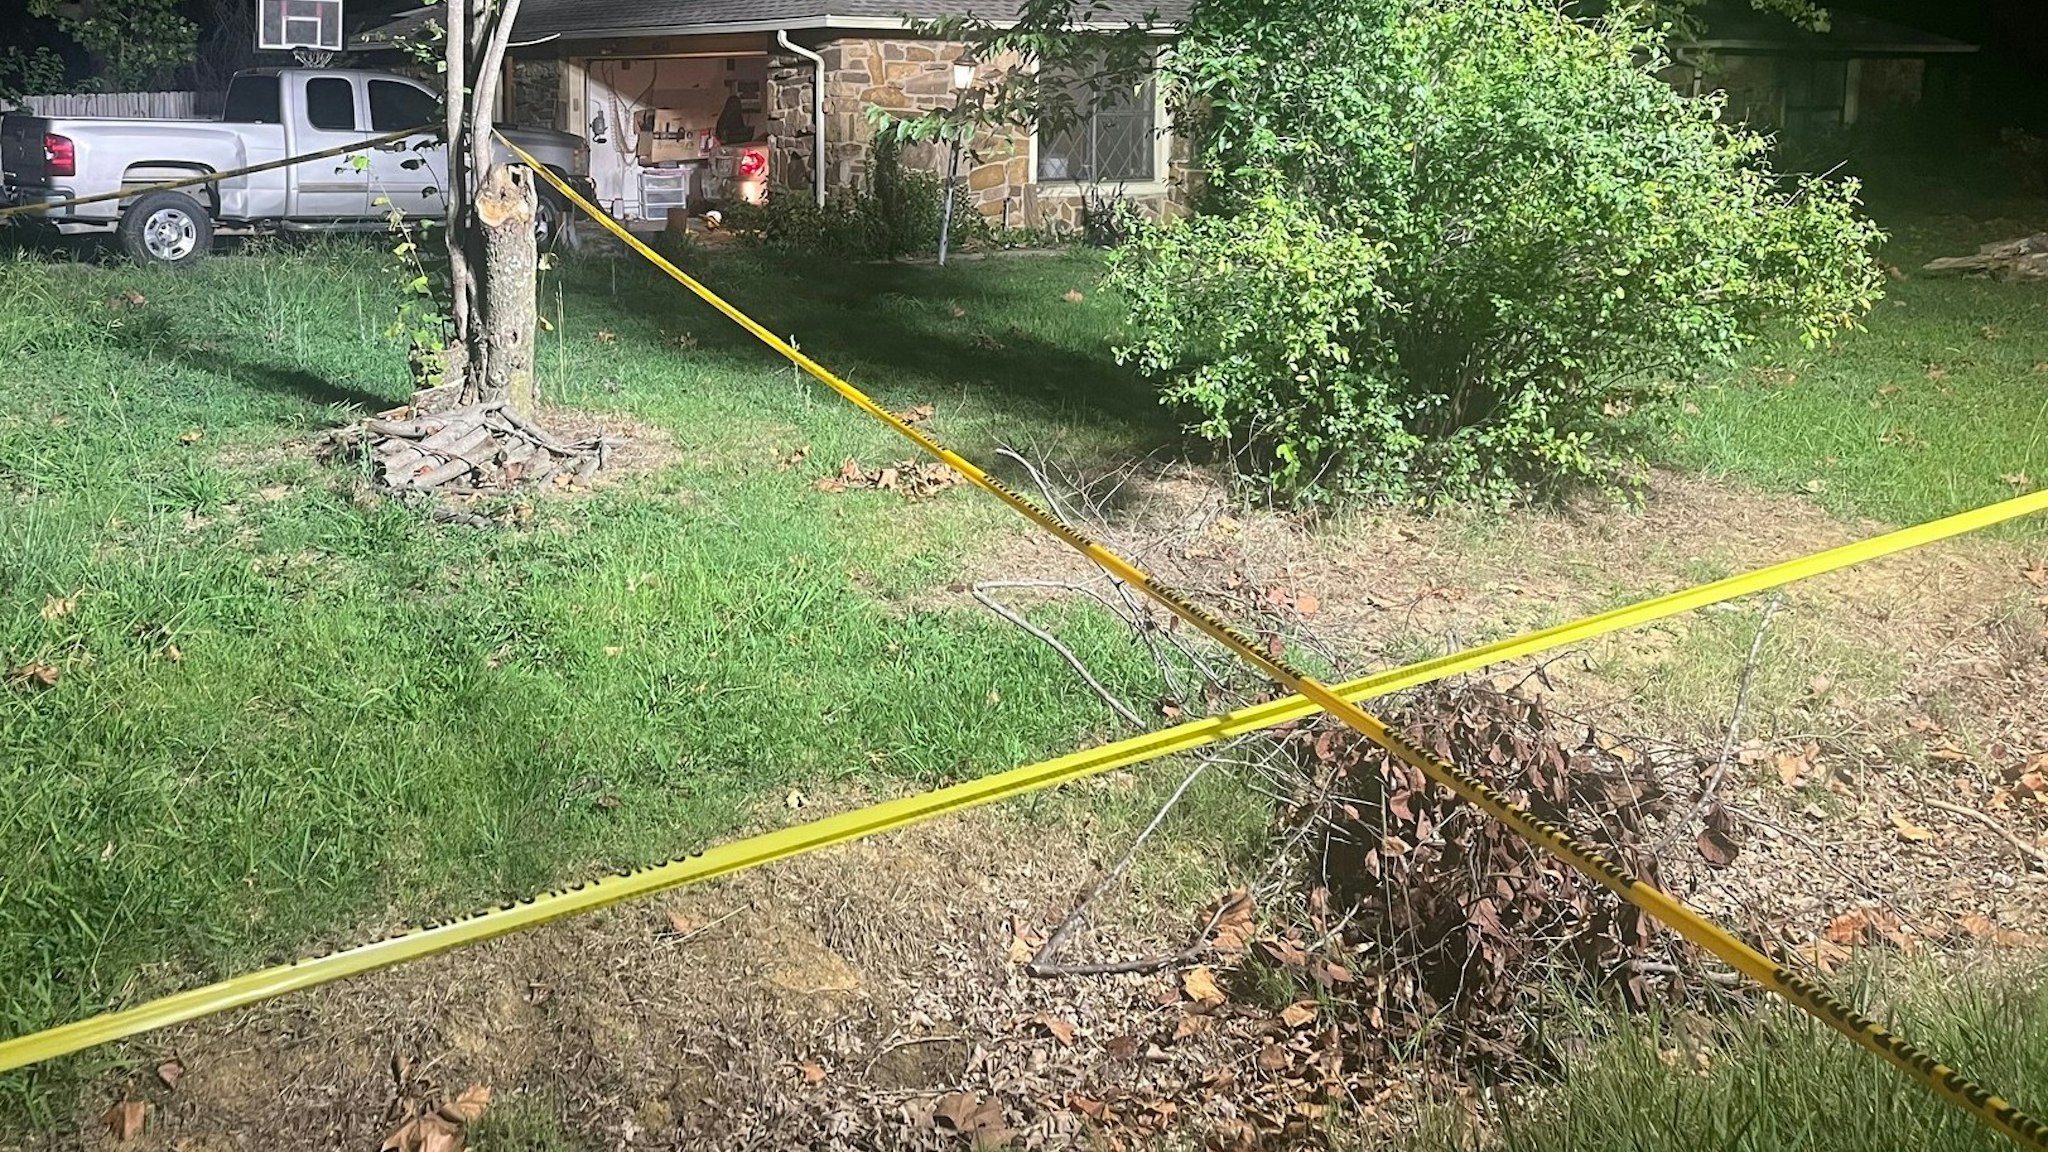 Police tape outside the home of Brandy McCaslin, 39, who murdered her three young children before turning the gun on herself.